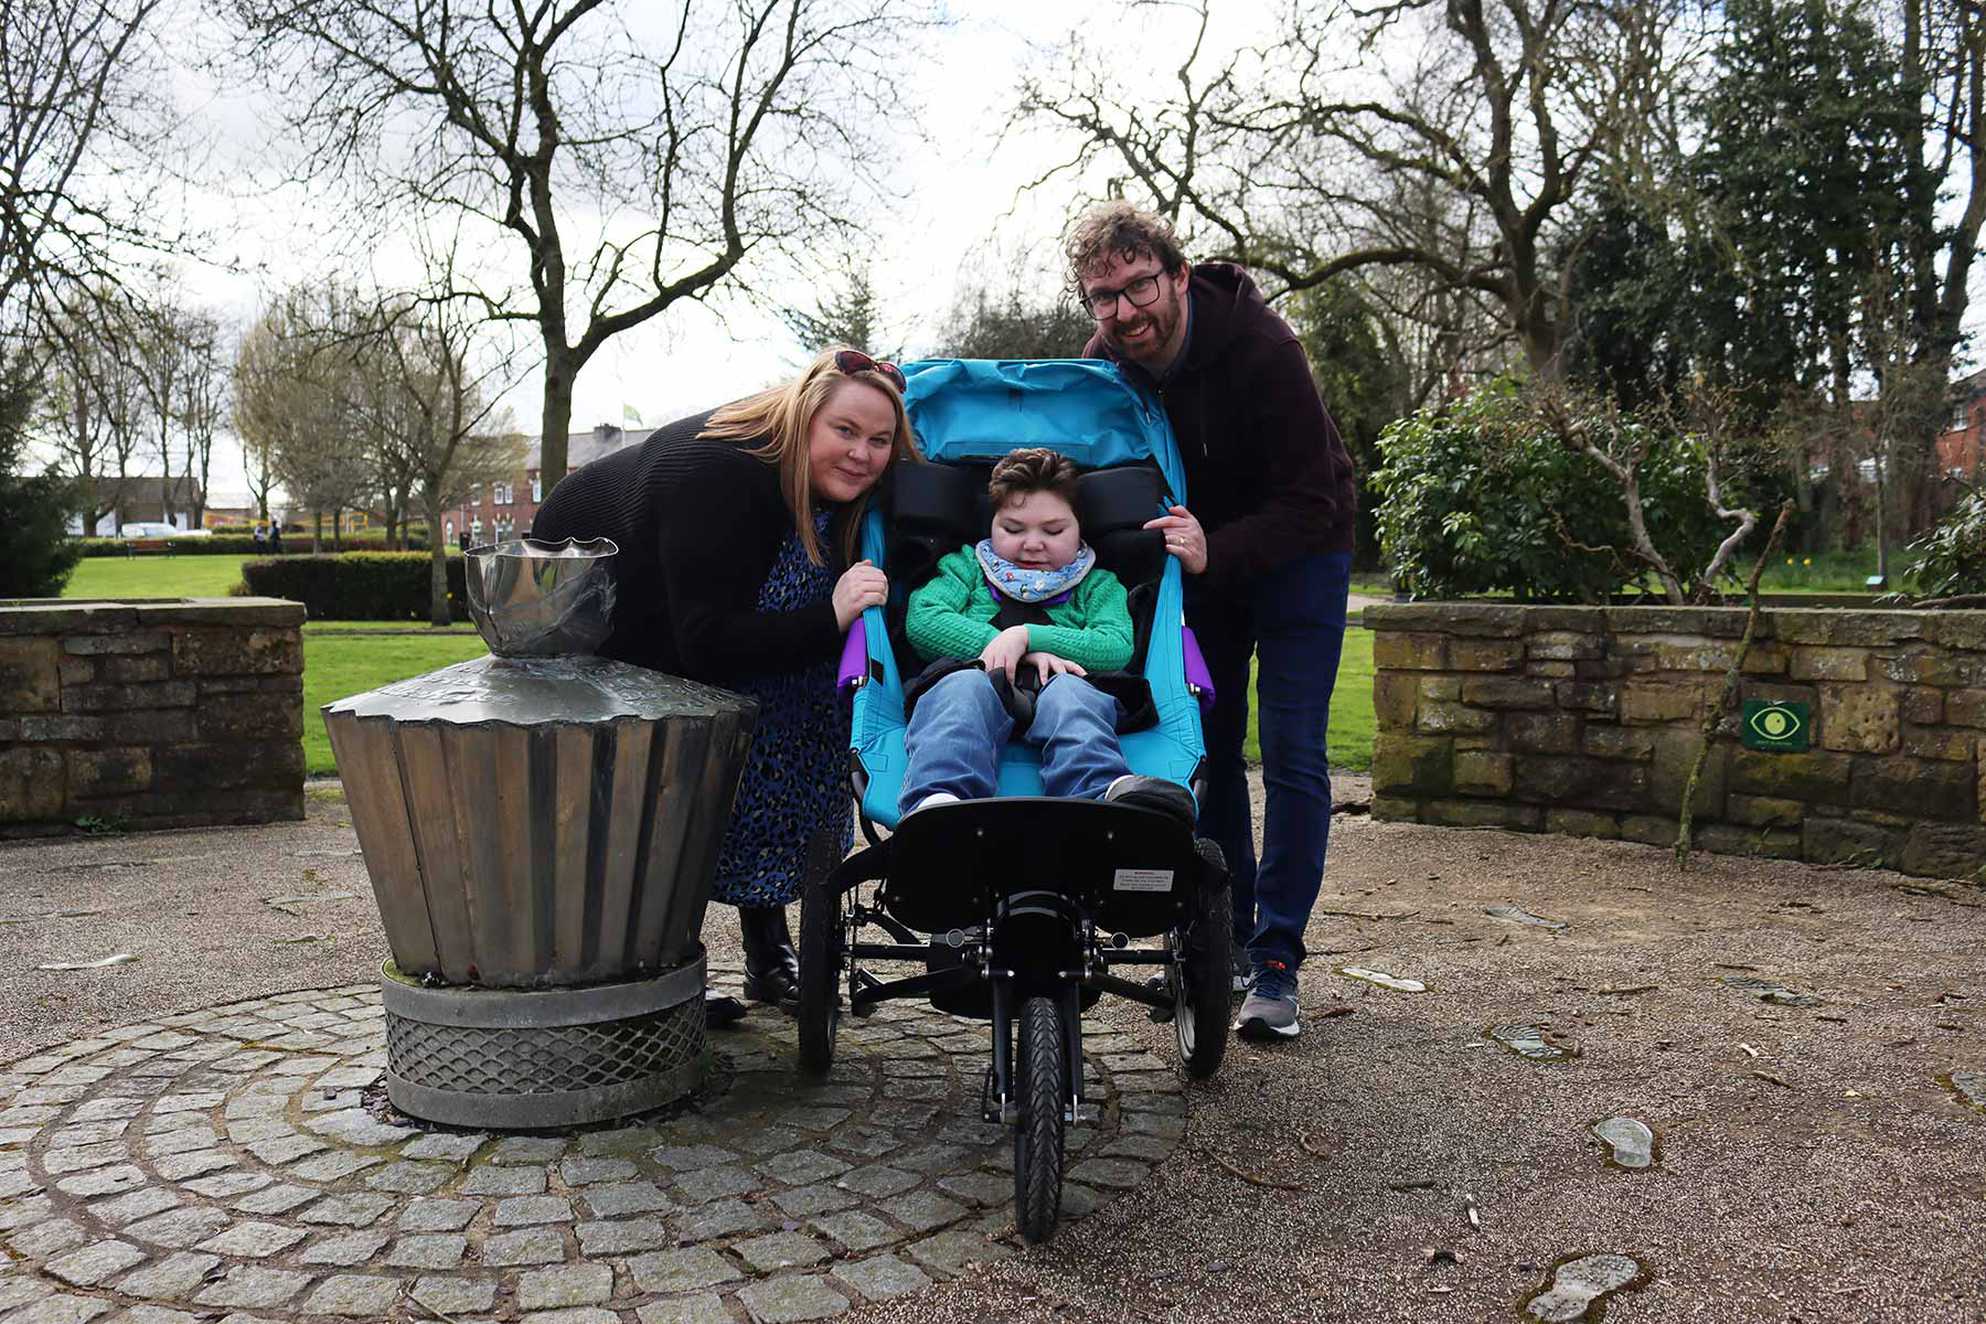 Zachariah with his mum and dad while visiting his local park in his new buggy.